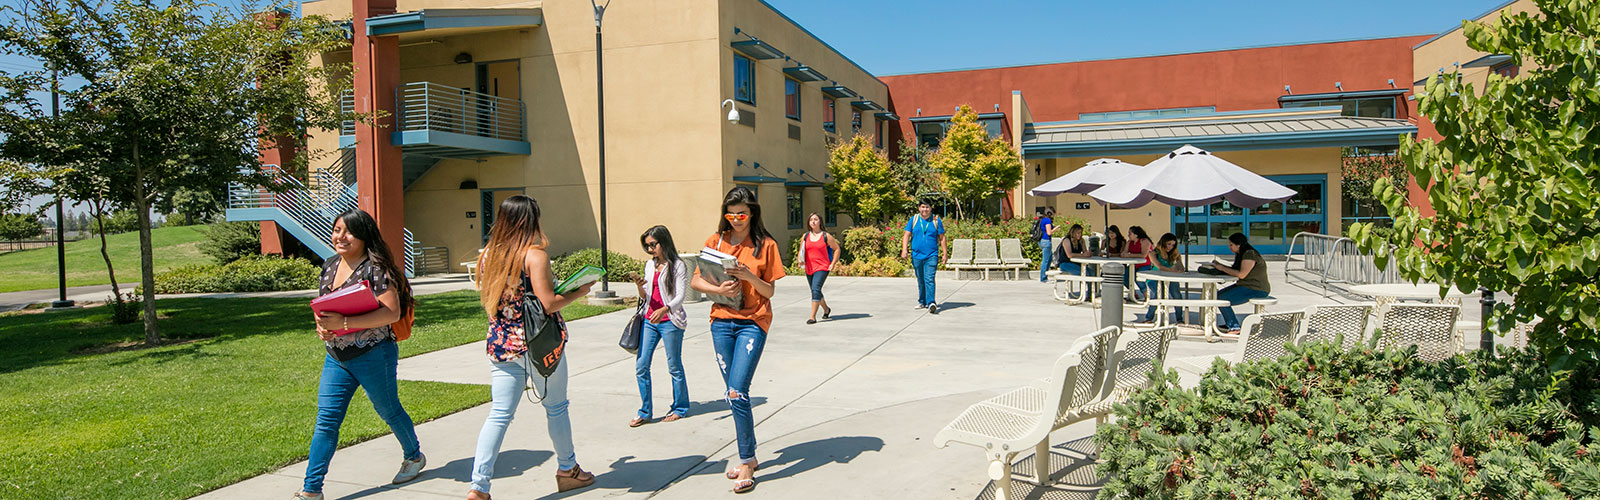 Students walking to Residence hall